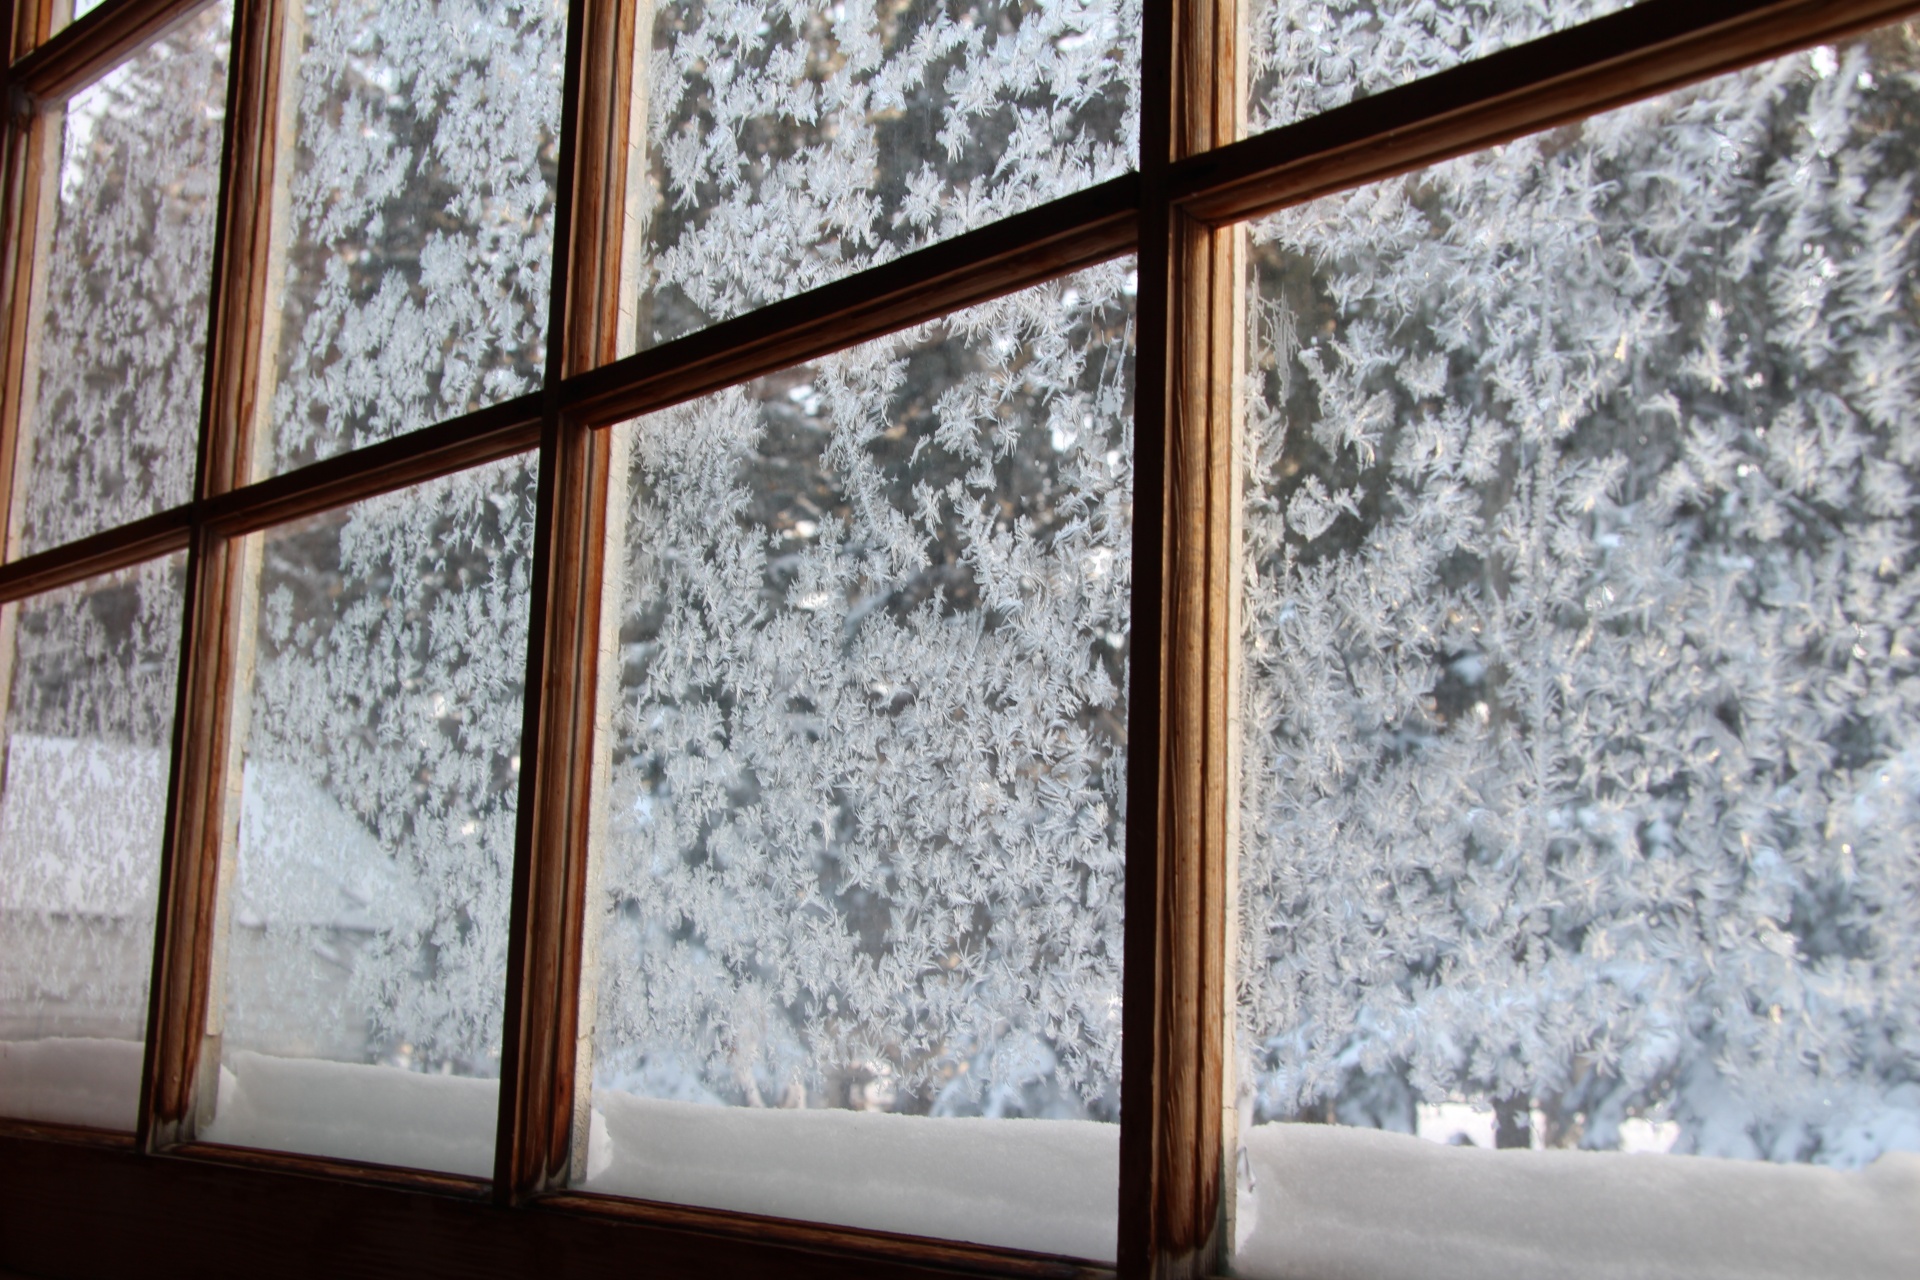 download-free-photo-of-frost-windows-cold-winter-jackfrost-from